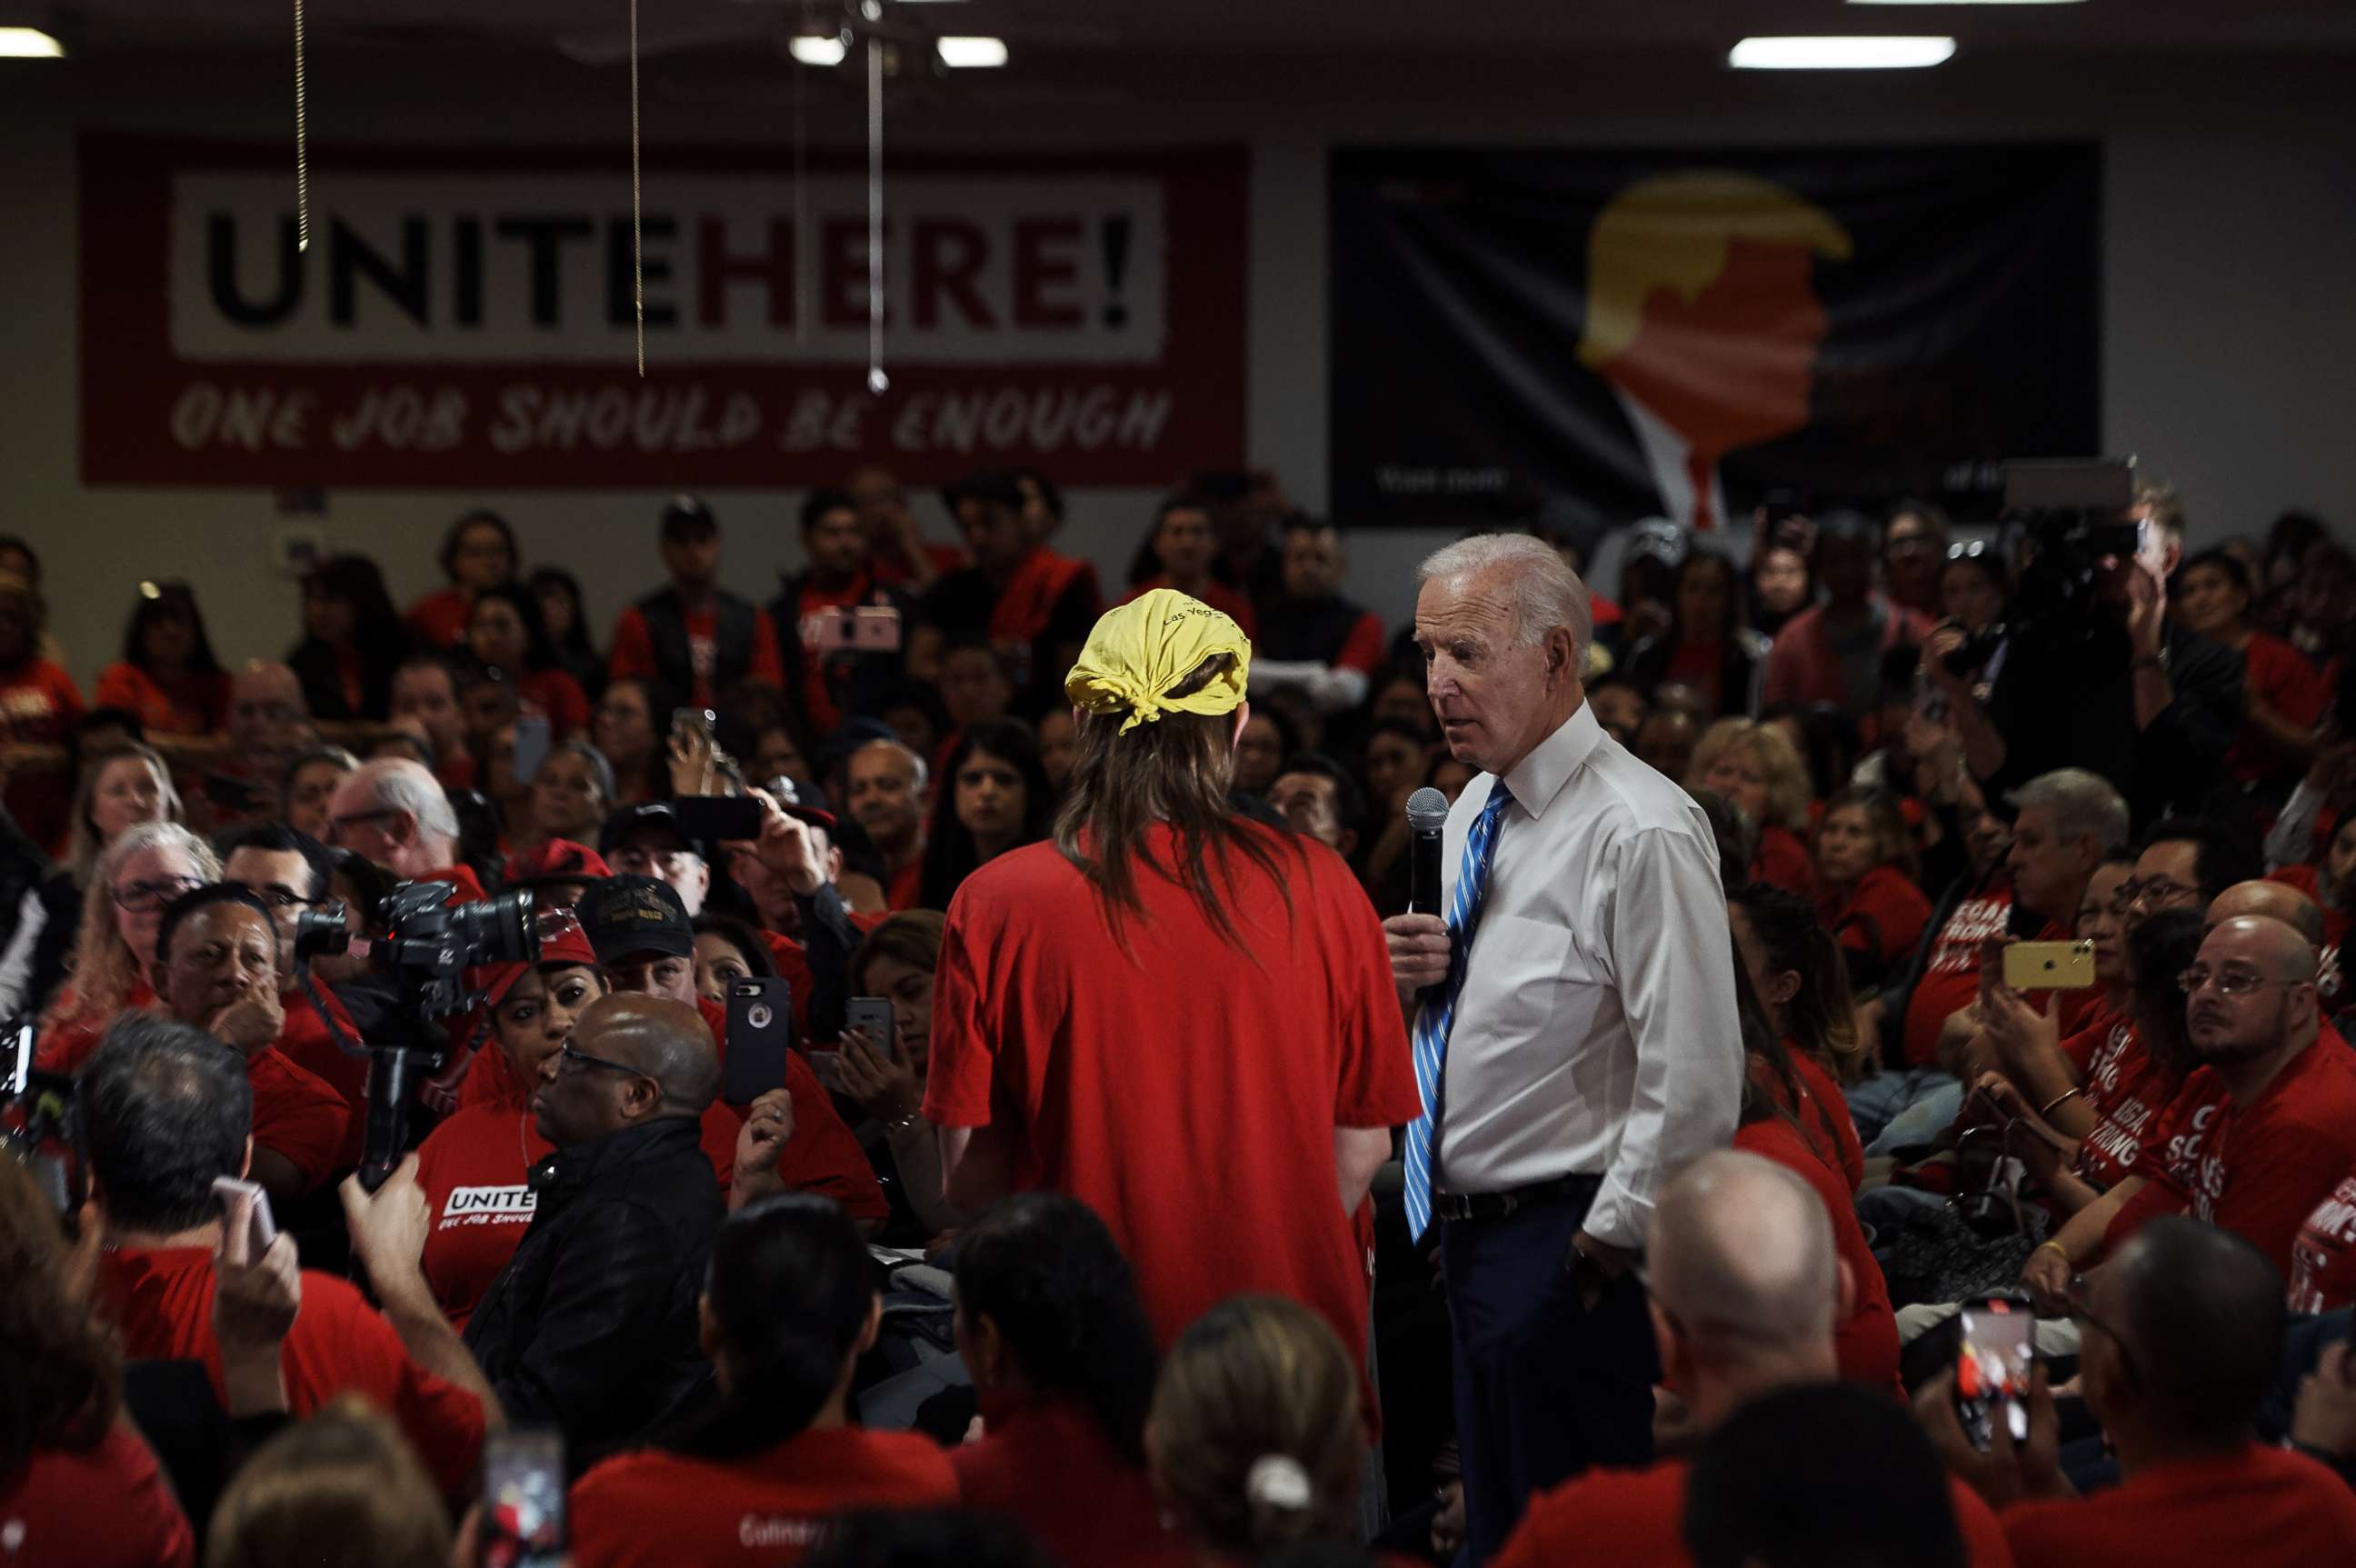 PHOTO: Former Vice President Joe Biden, a Democratic candidate for president, listens to a question about healthcare, as he takes part in a series of town halls at Culinary Workers Union Local 226 in Las Vegas, Dec. 11, 2019.